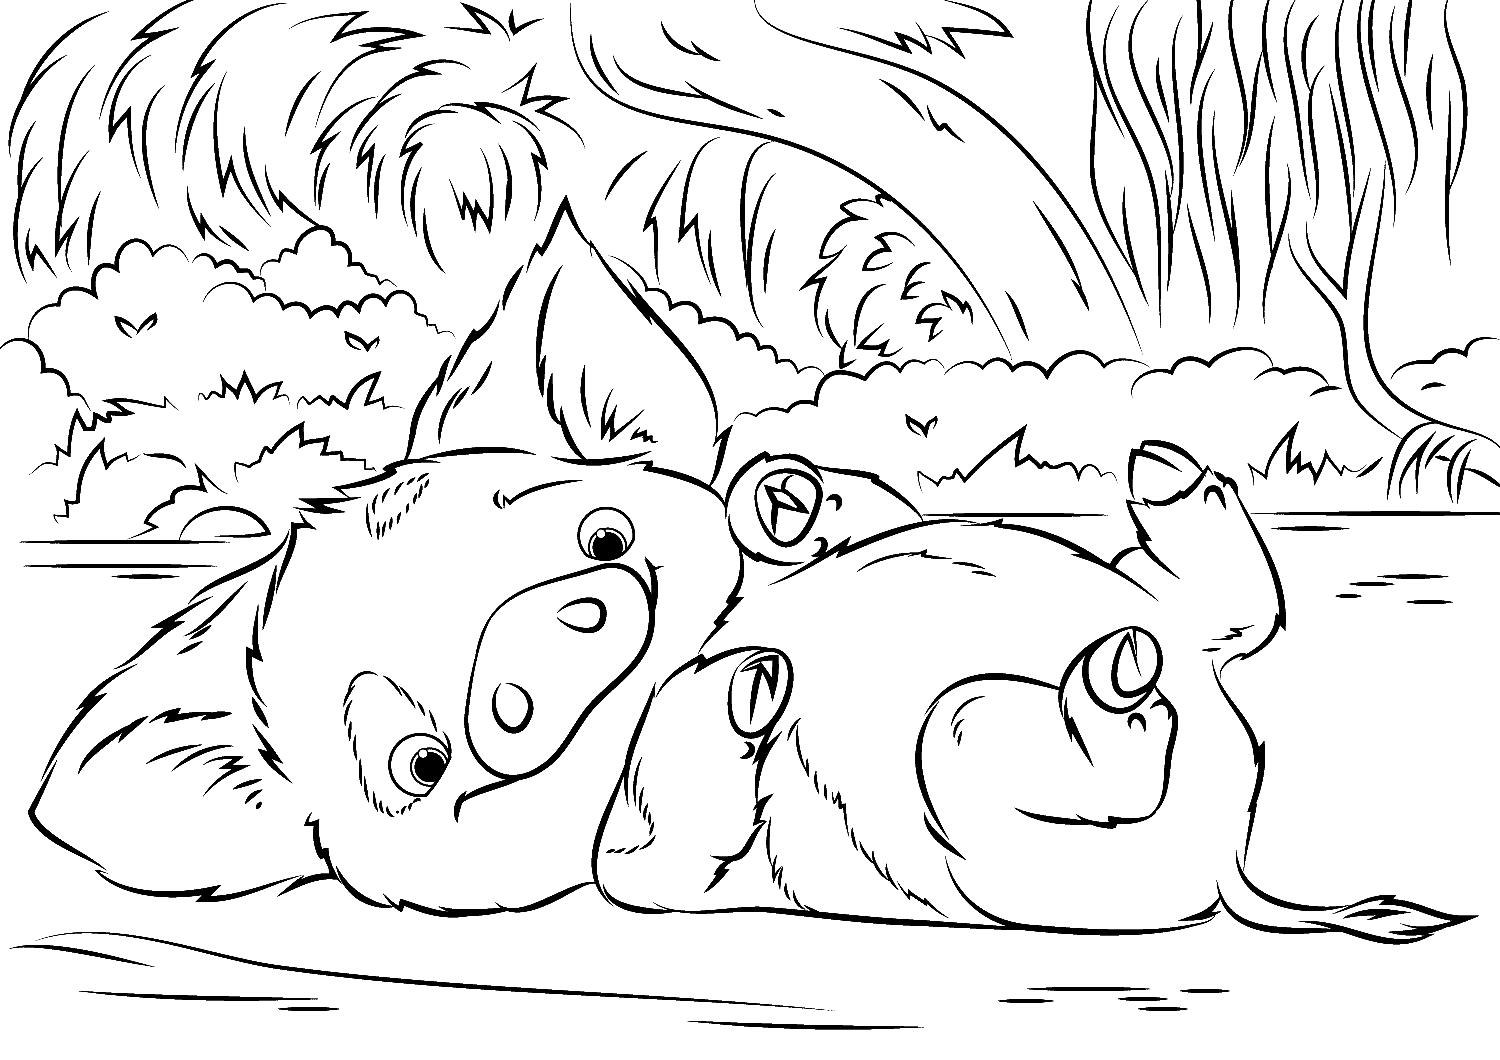 Pua Pet Pig from Moana from Moana Coloring Pages